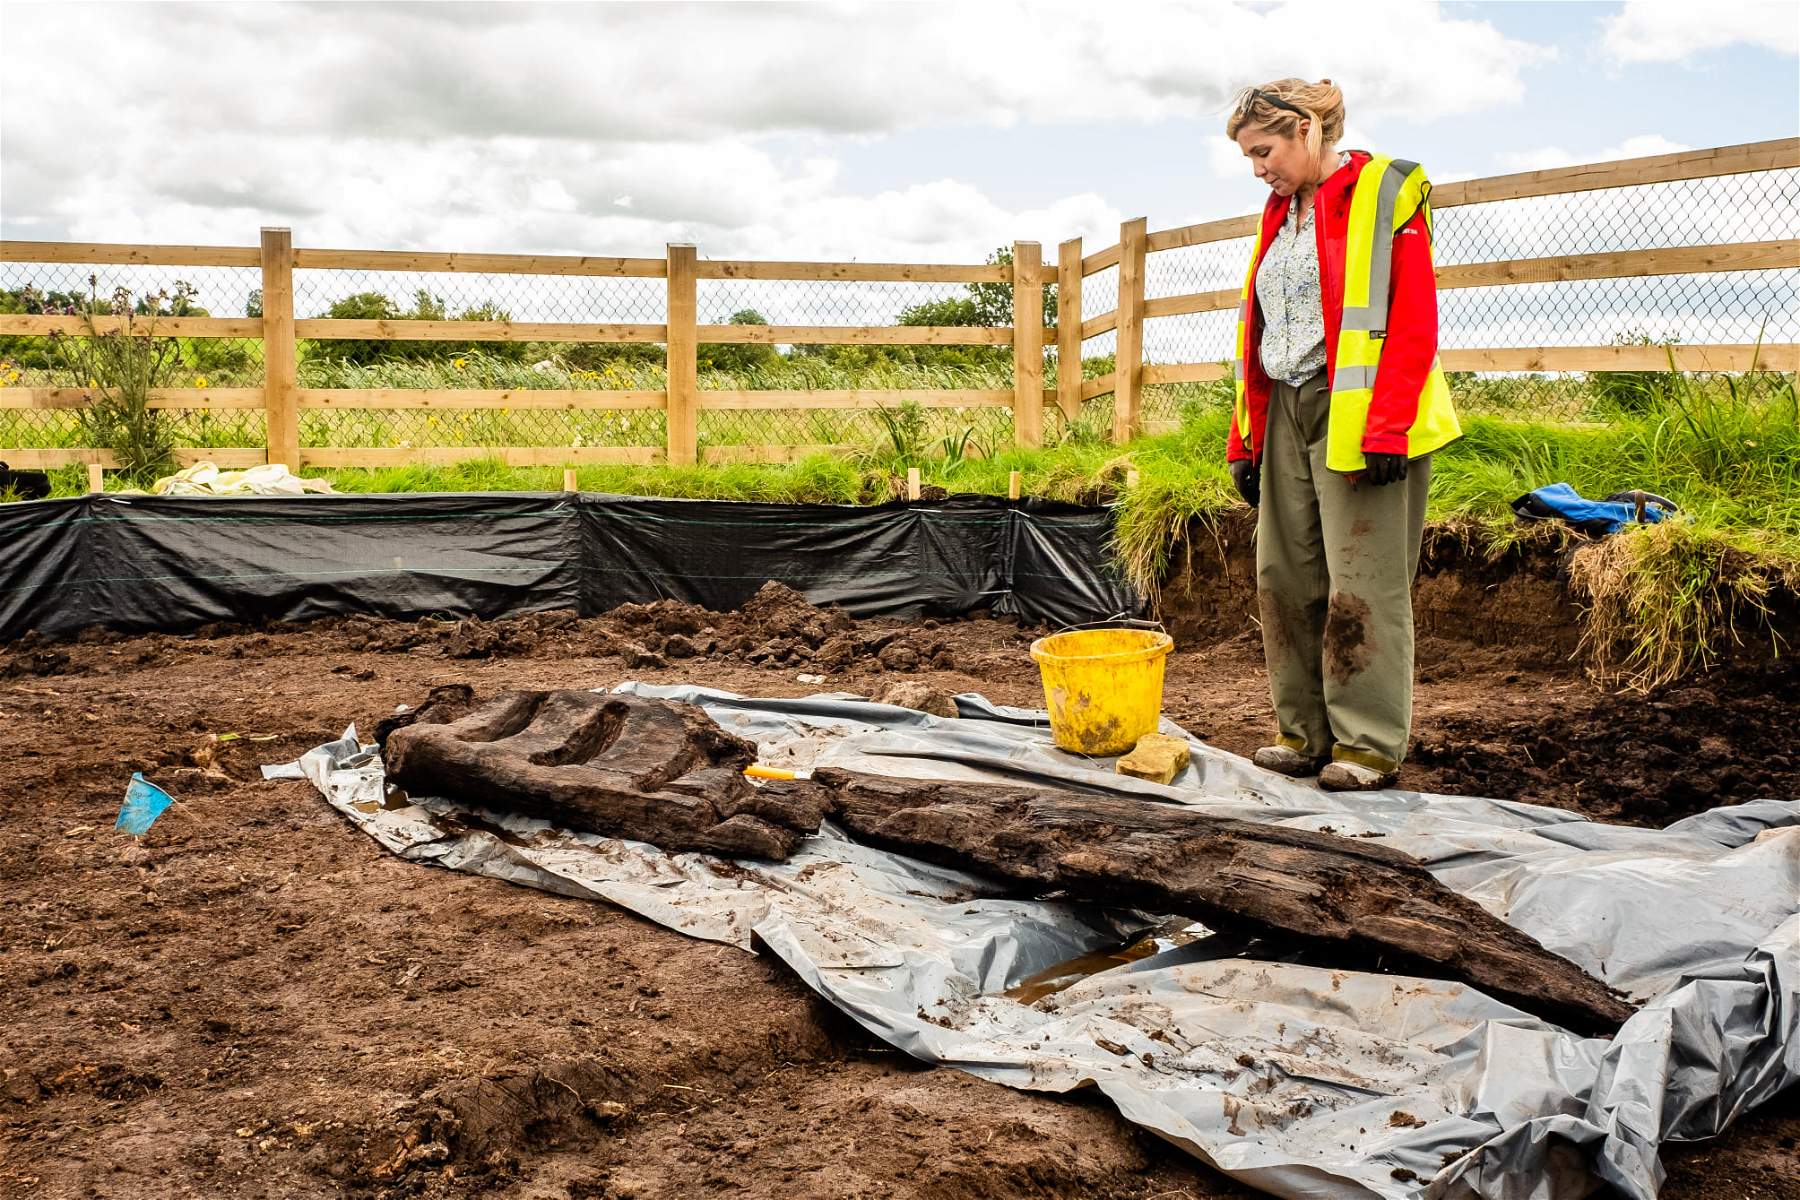 Ireland, rare 1,600-year-old wooden pagan idol discovered in a bog